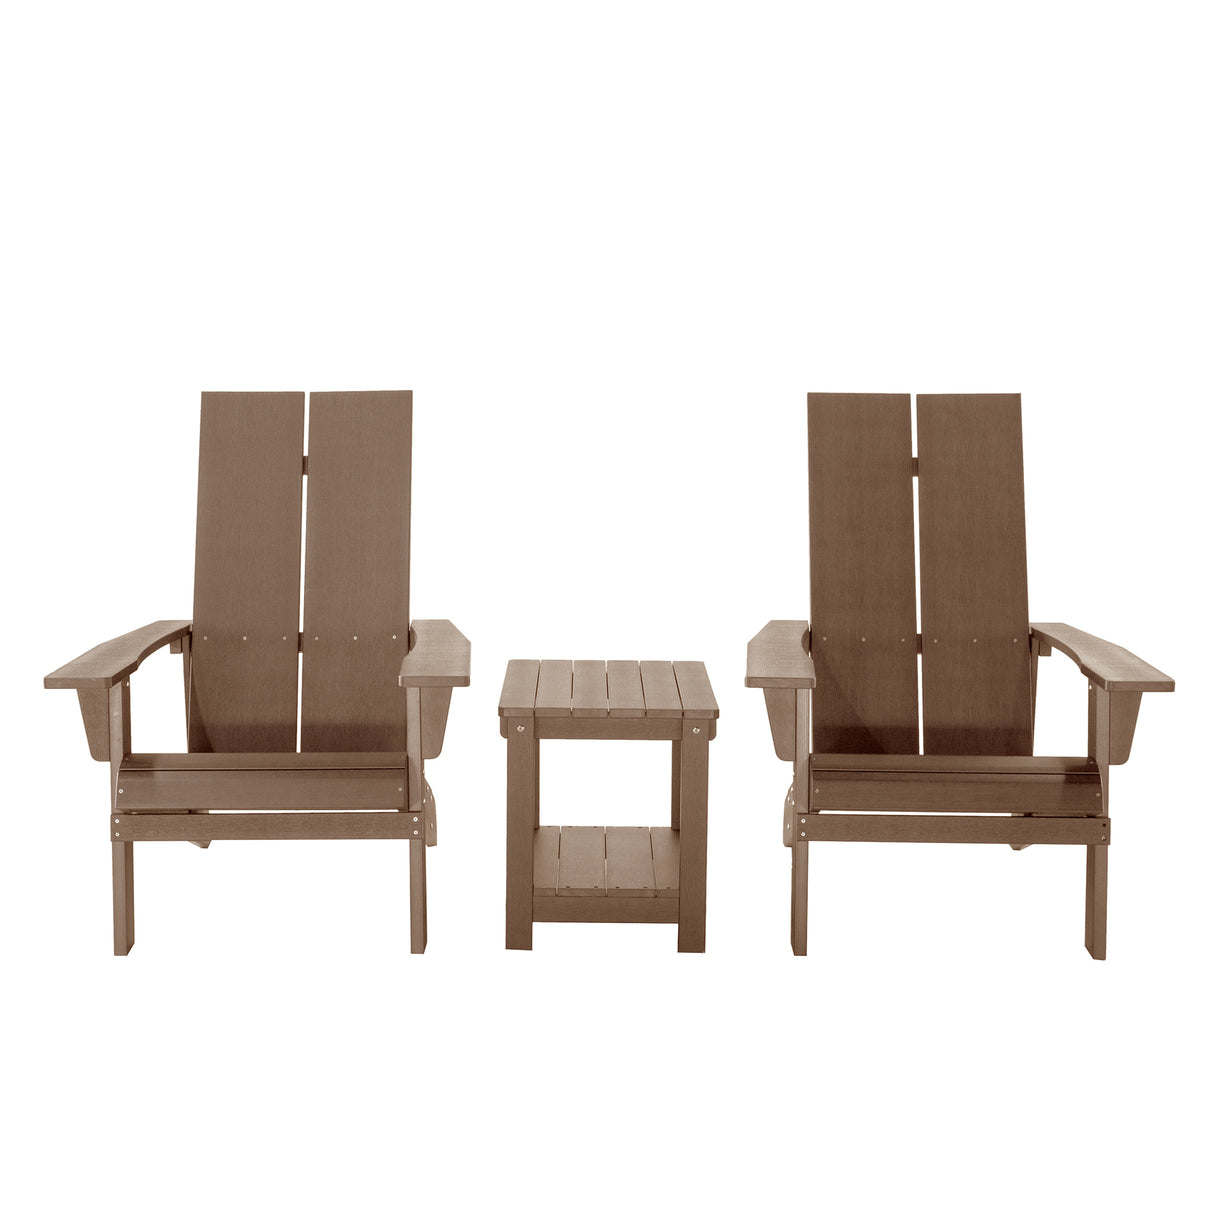 Key West 3 Piece Outdoor Patio All-Weather Plastic Wood Adirondack Bistro Set, 2 Adirondack chairs, and 1 small, side, end table set for Deck, Backyards, Garden, Lawns, Poolside, and Beaches, Brown - Home Elegance USA